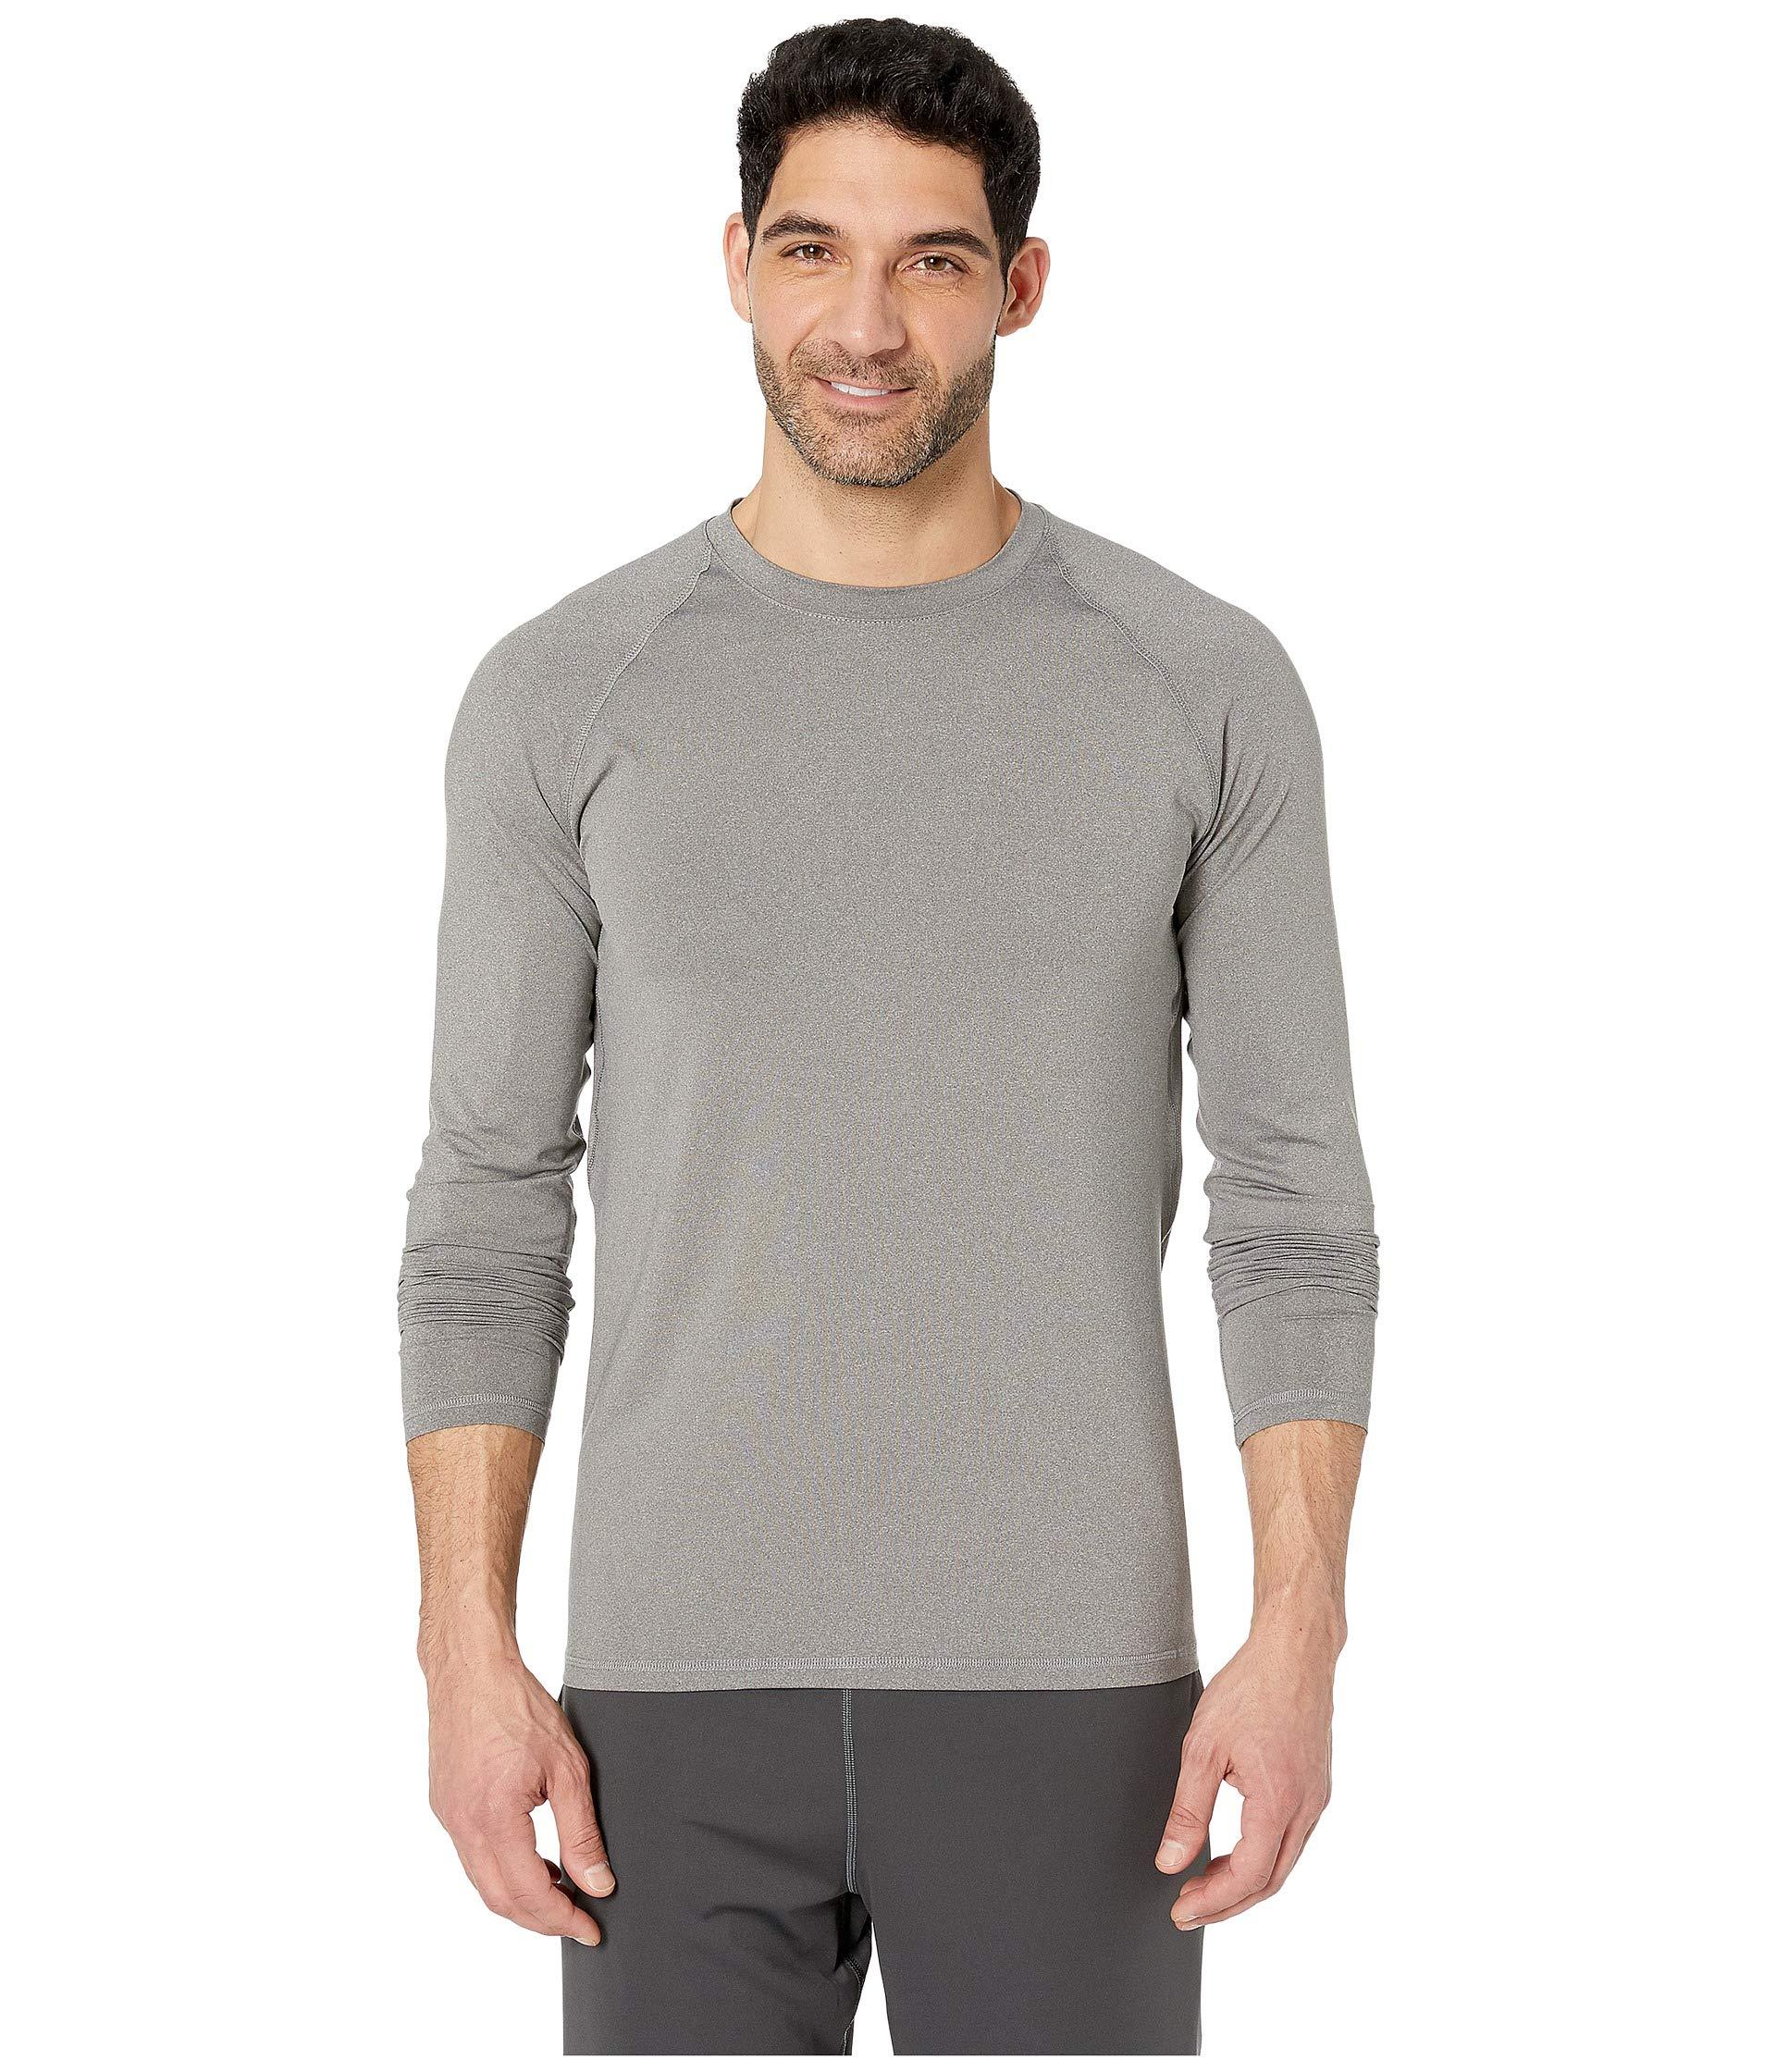 Jockey Active Synthetic Long Sleeve Sport Top in Gray for Men - Lyst